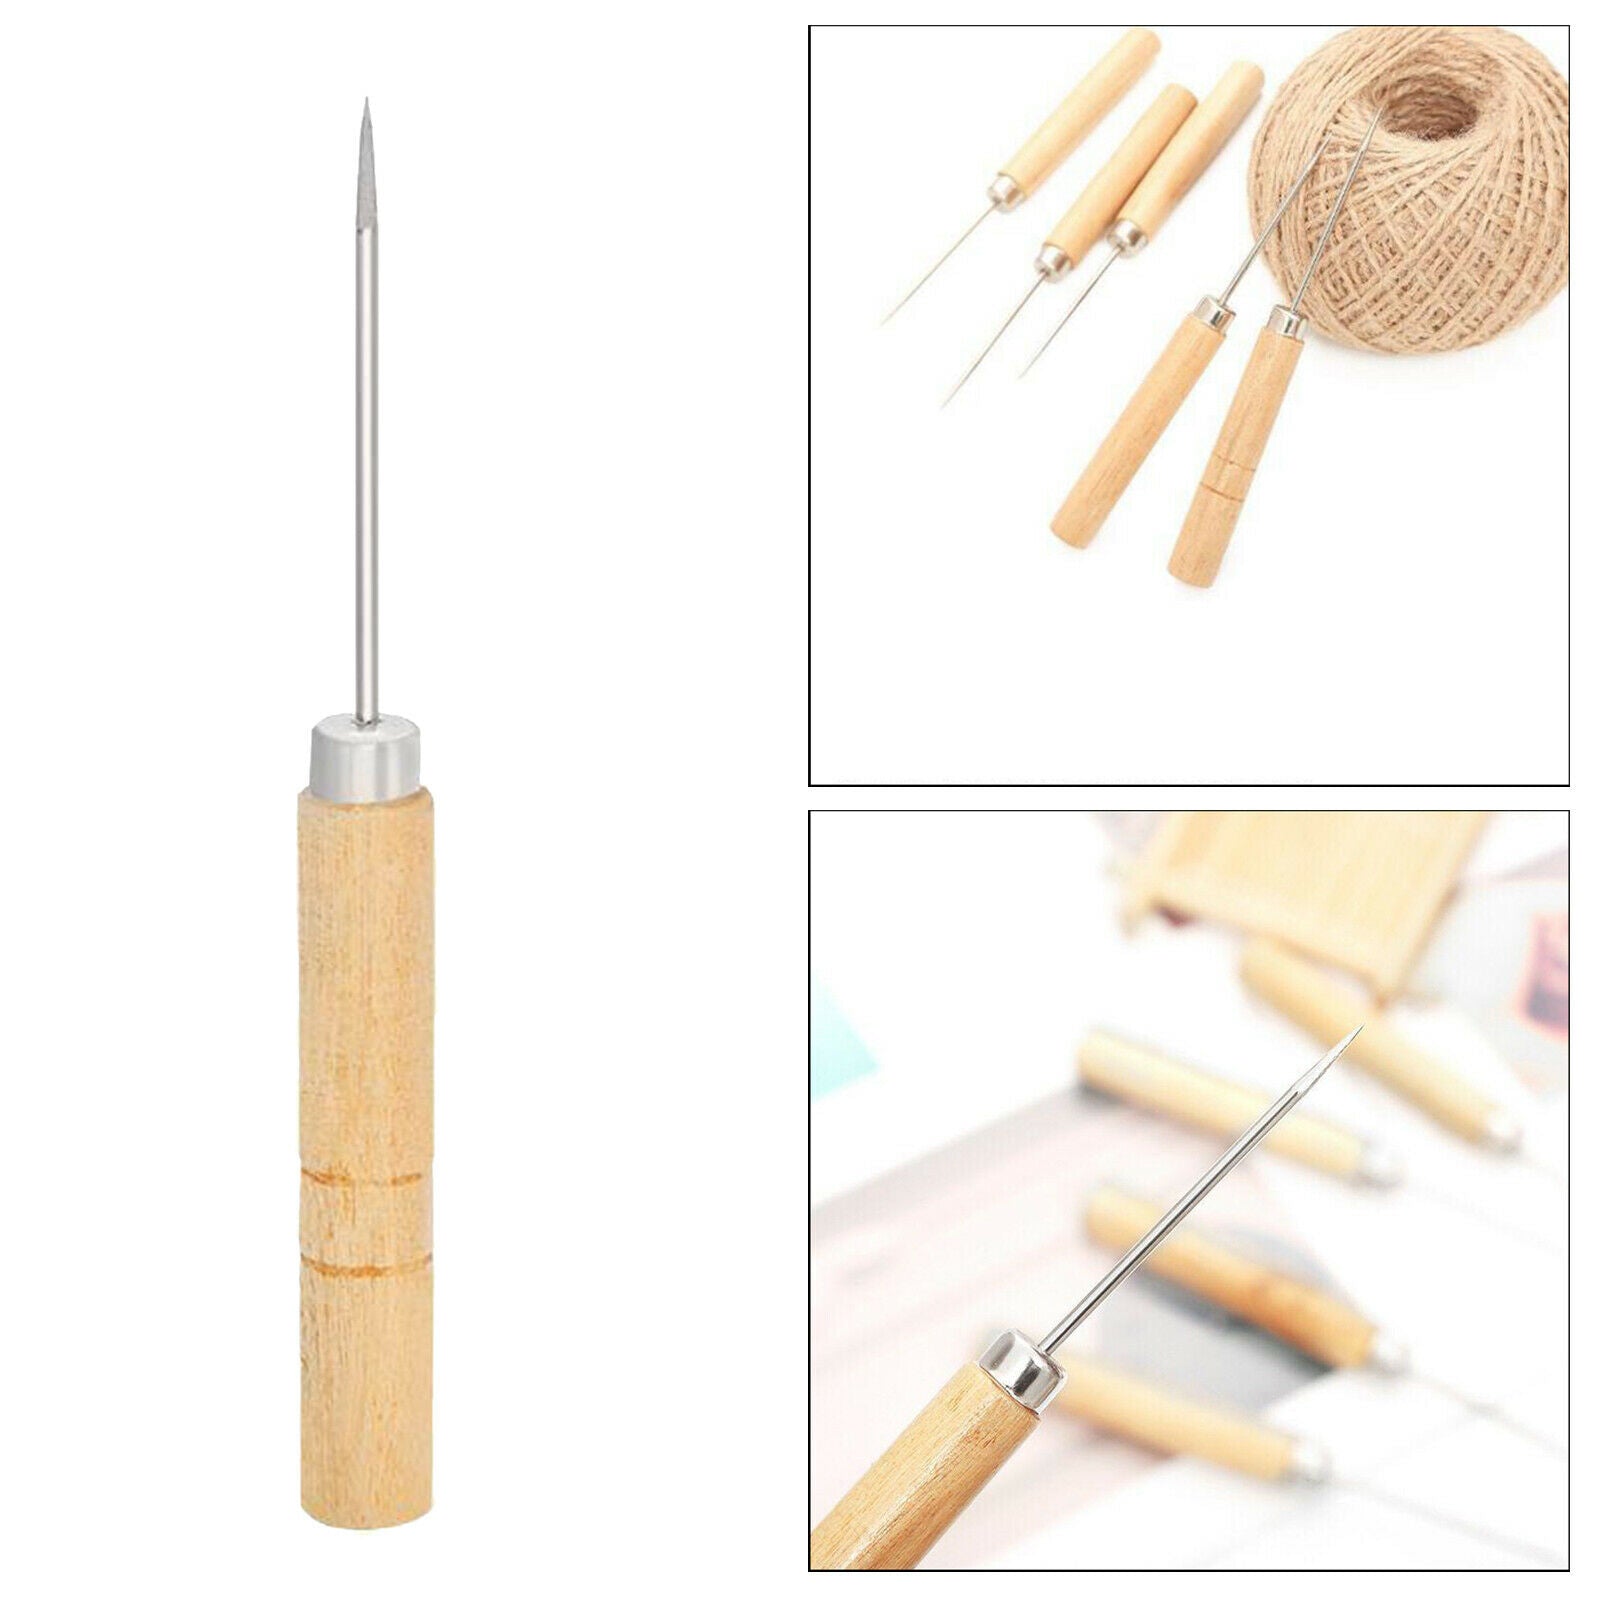 Bookbinding Tool, Sewing Awl Tool, Leather Sewing Needles for Leathercraft